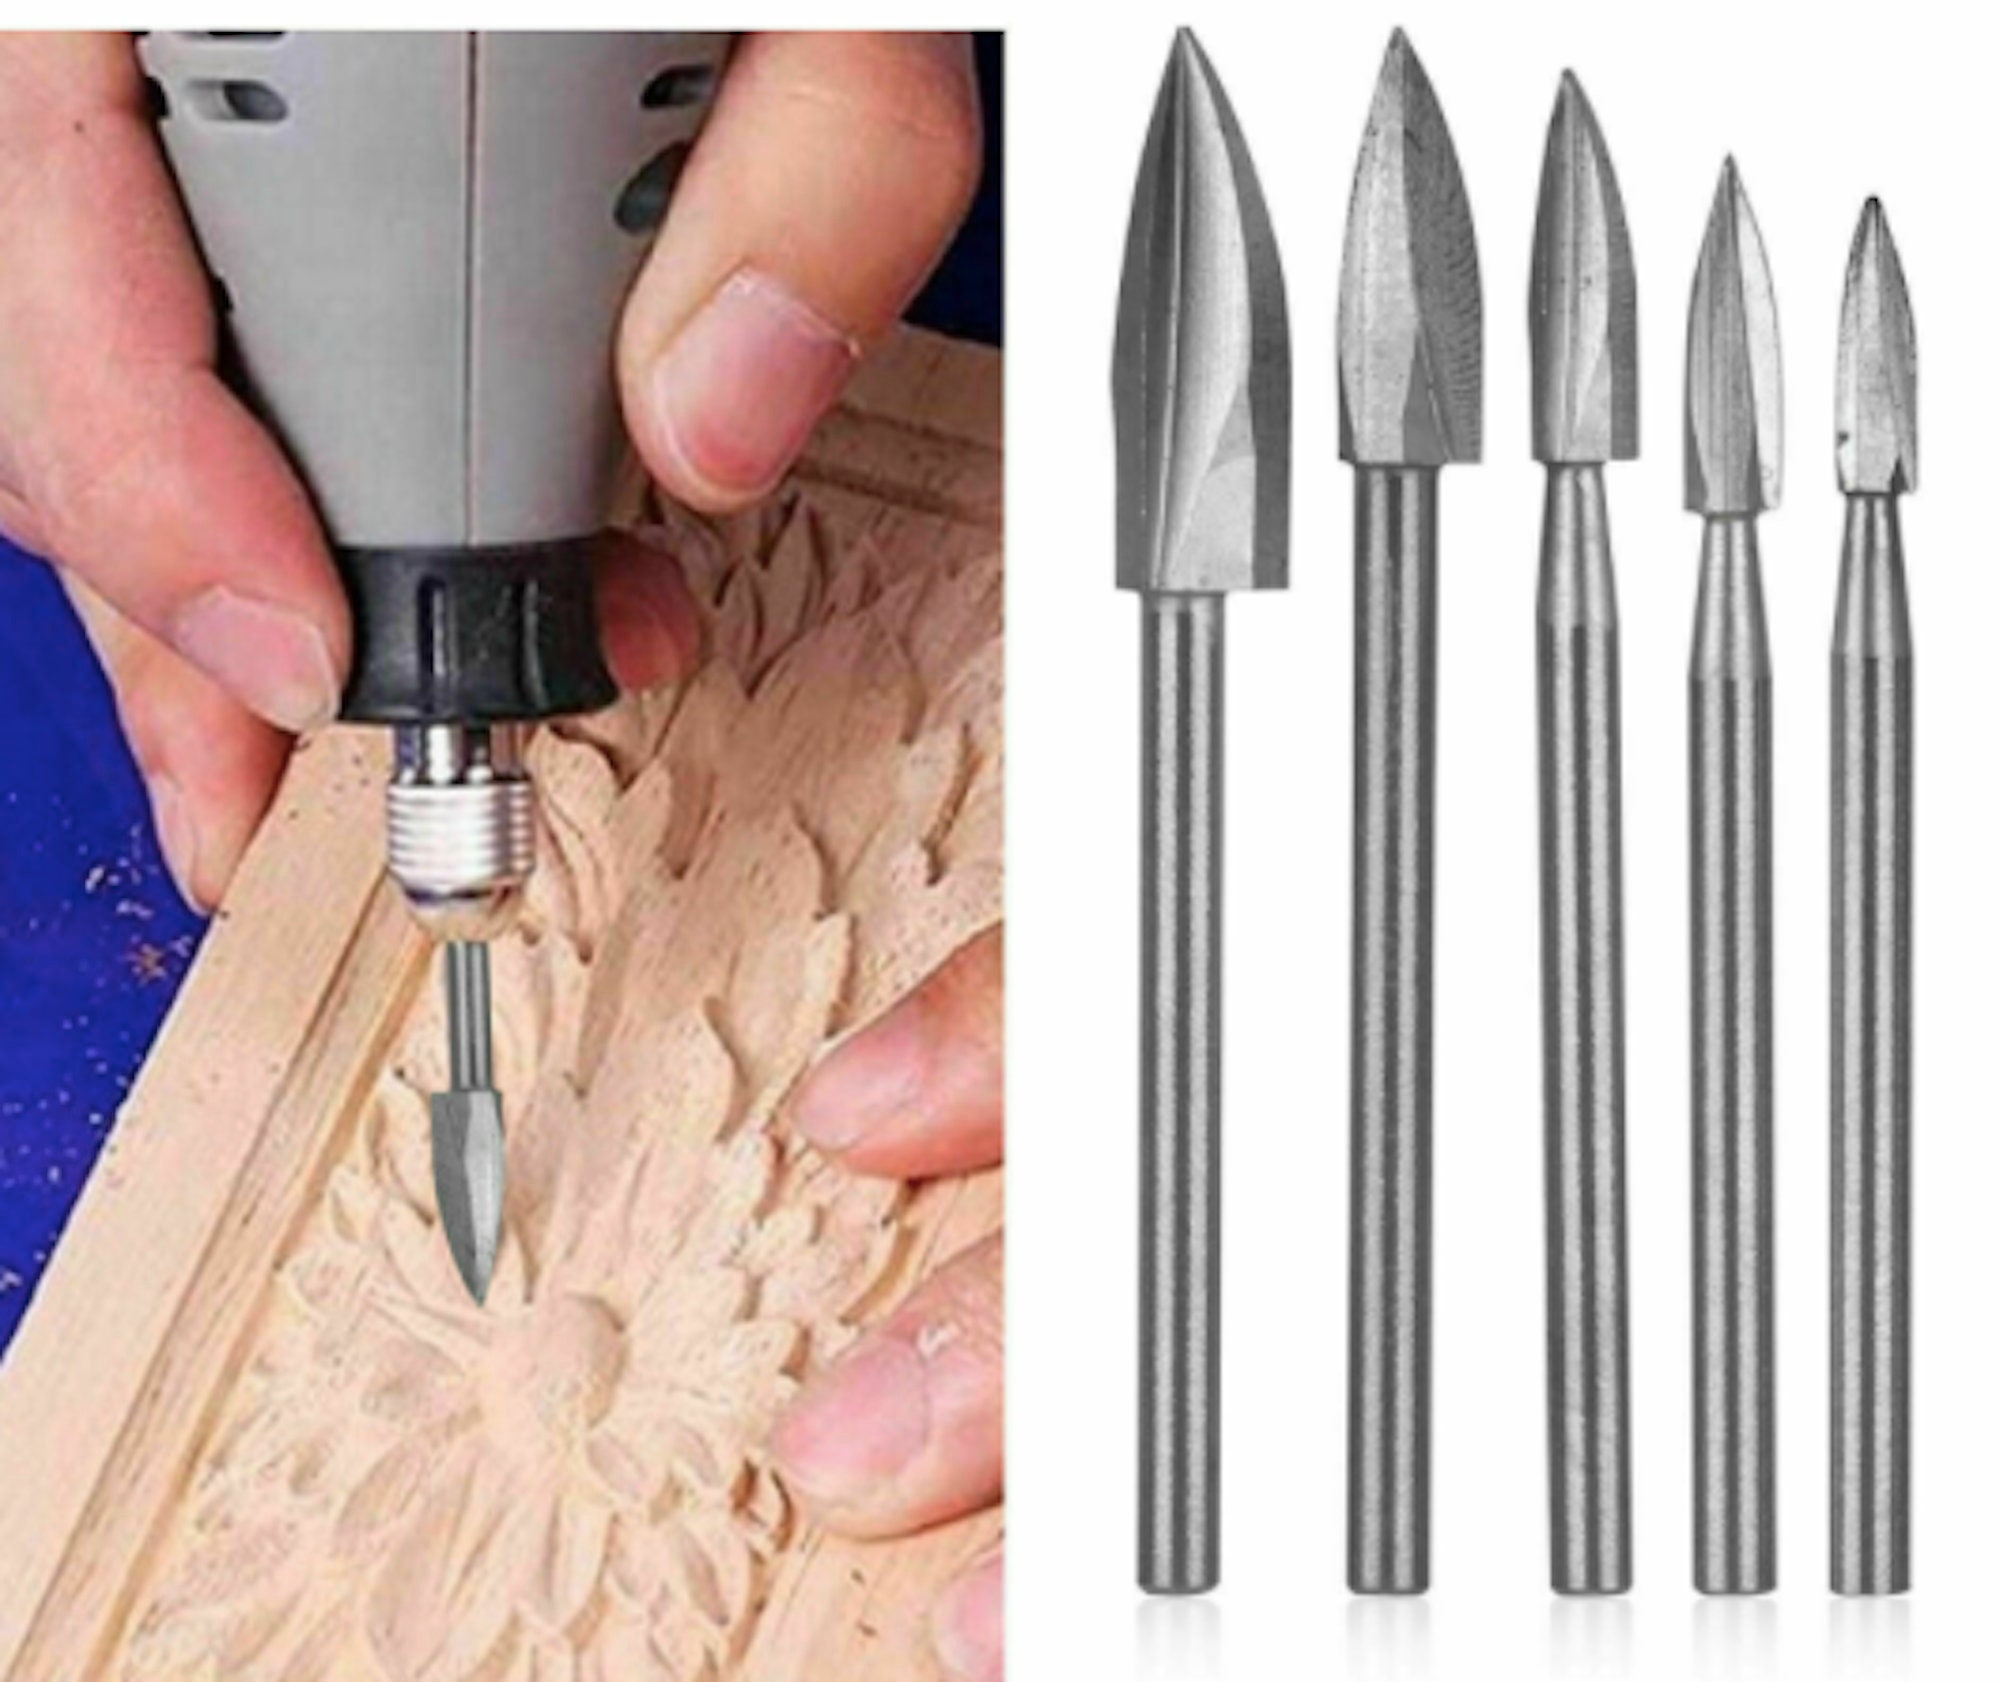 5pc Wood Carving Engraving Drill Bits Set Woodworking Carving Tool Kits 